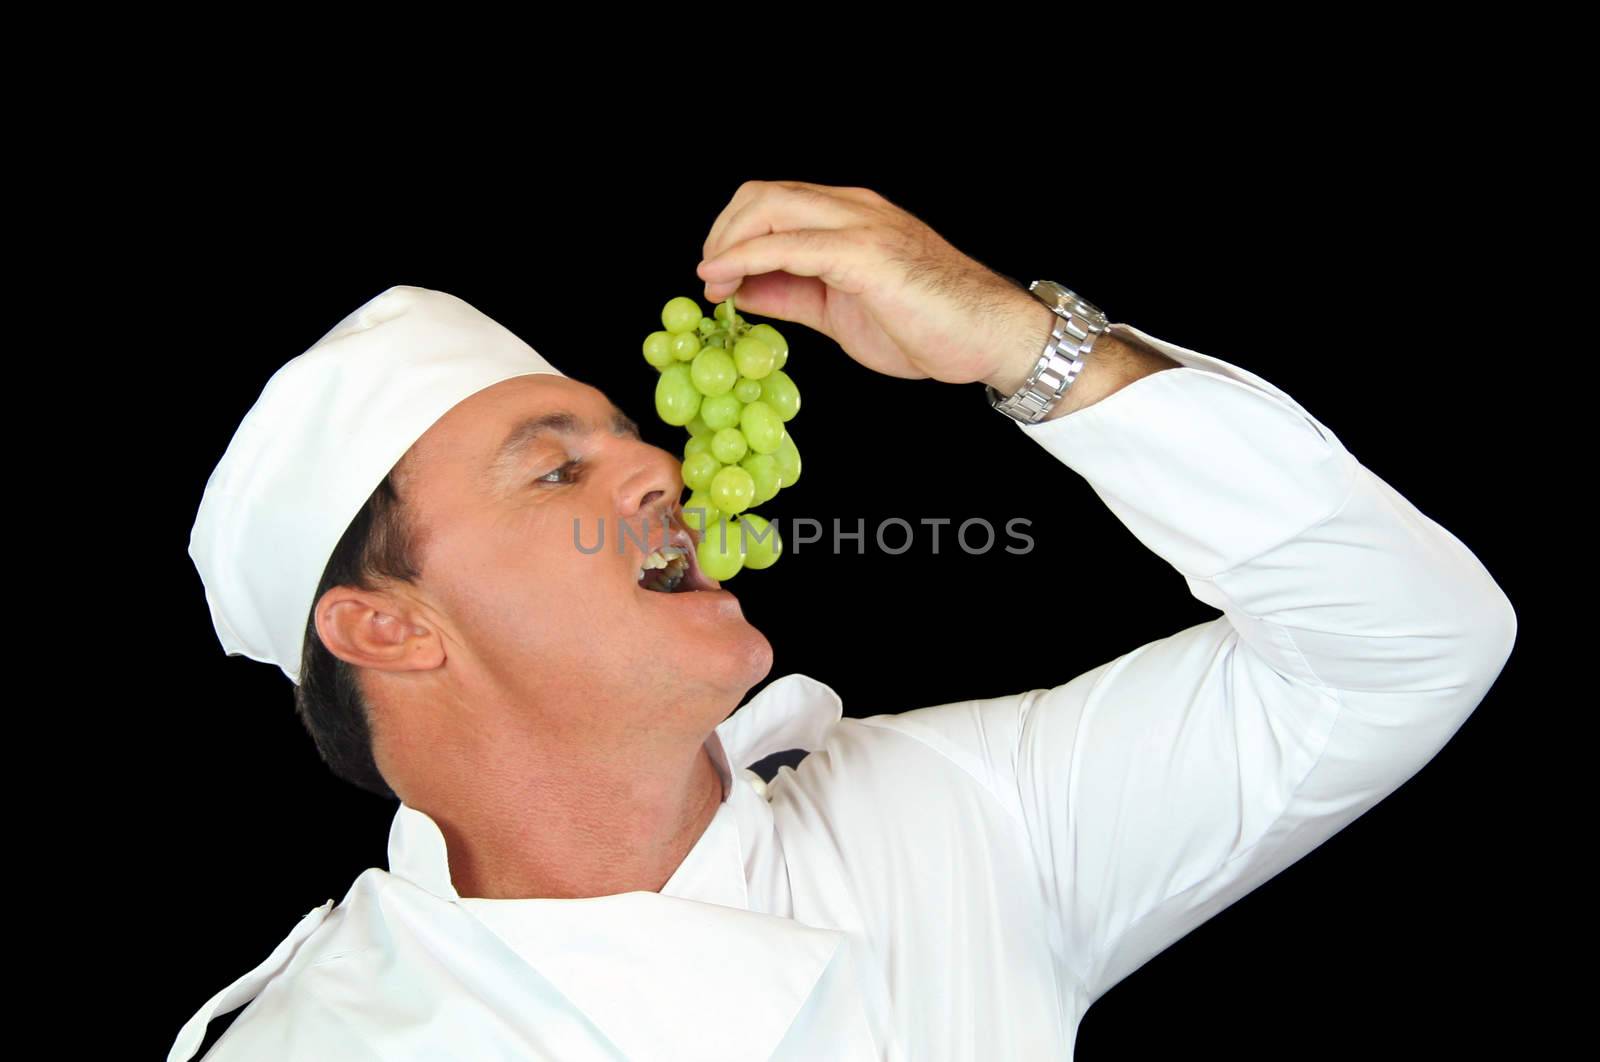 Chef lifting a bunch of grapes to his mouth to eat.